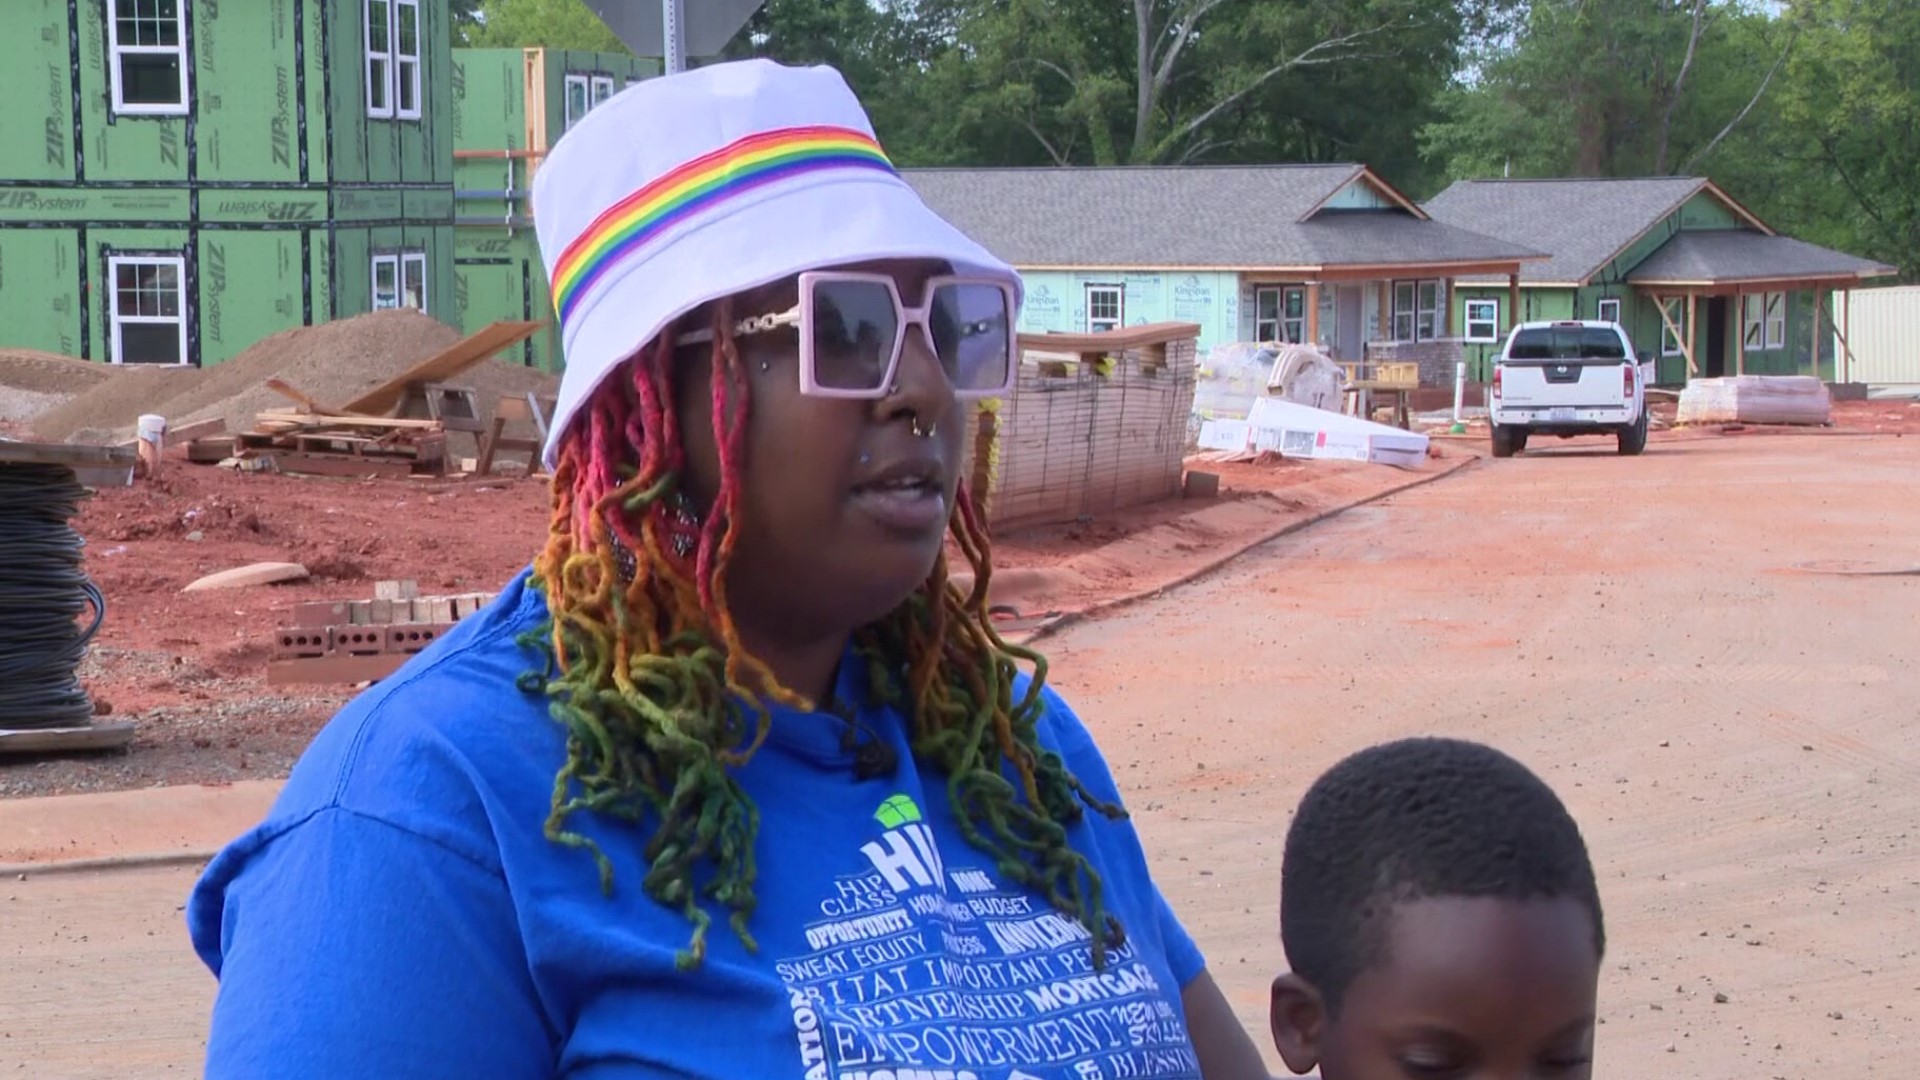 A single mother who has macular dystrophy and is legally blind will be one of 39 homeowners in a new affordable housing community in west Charlotte.